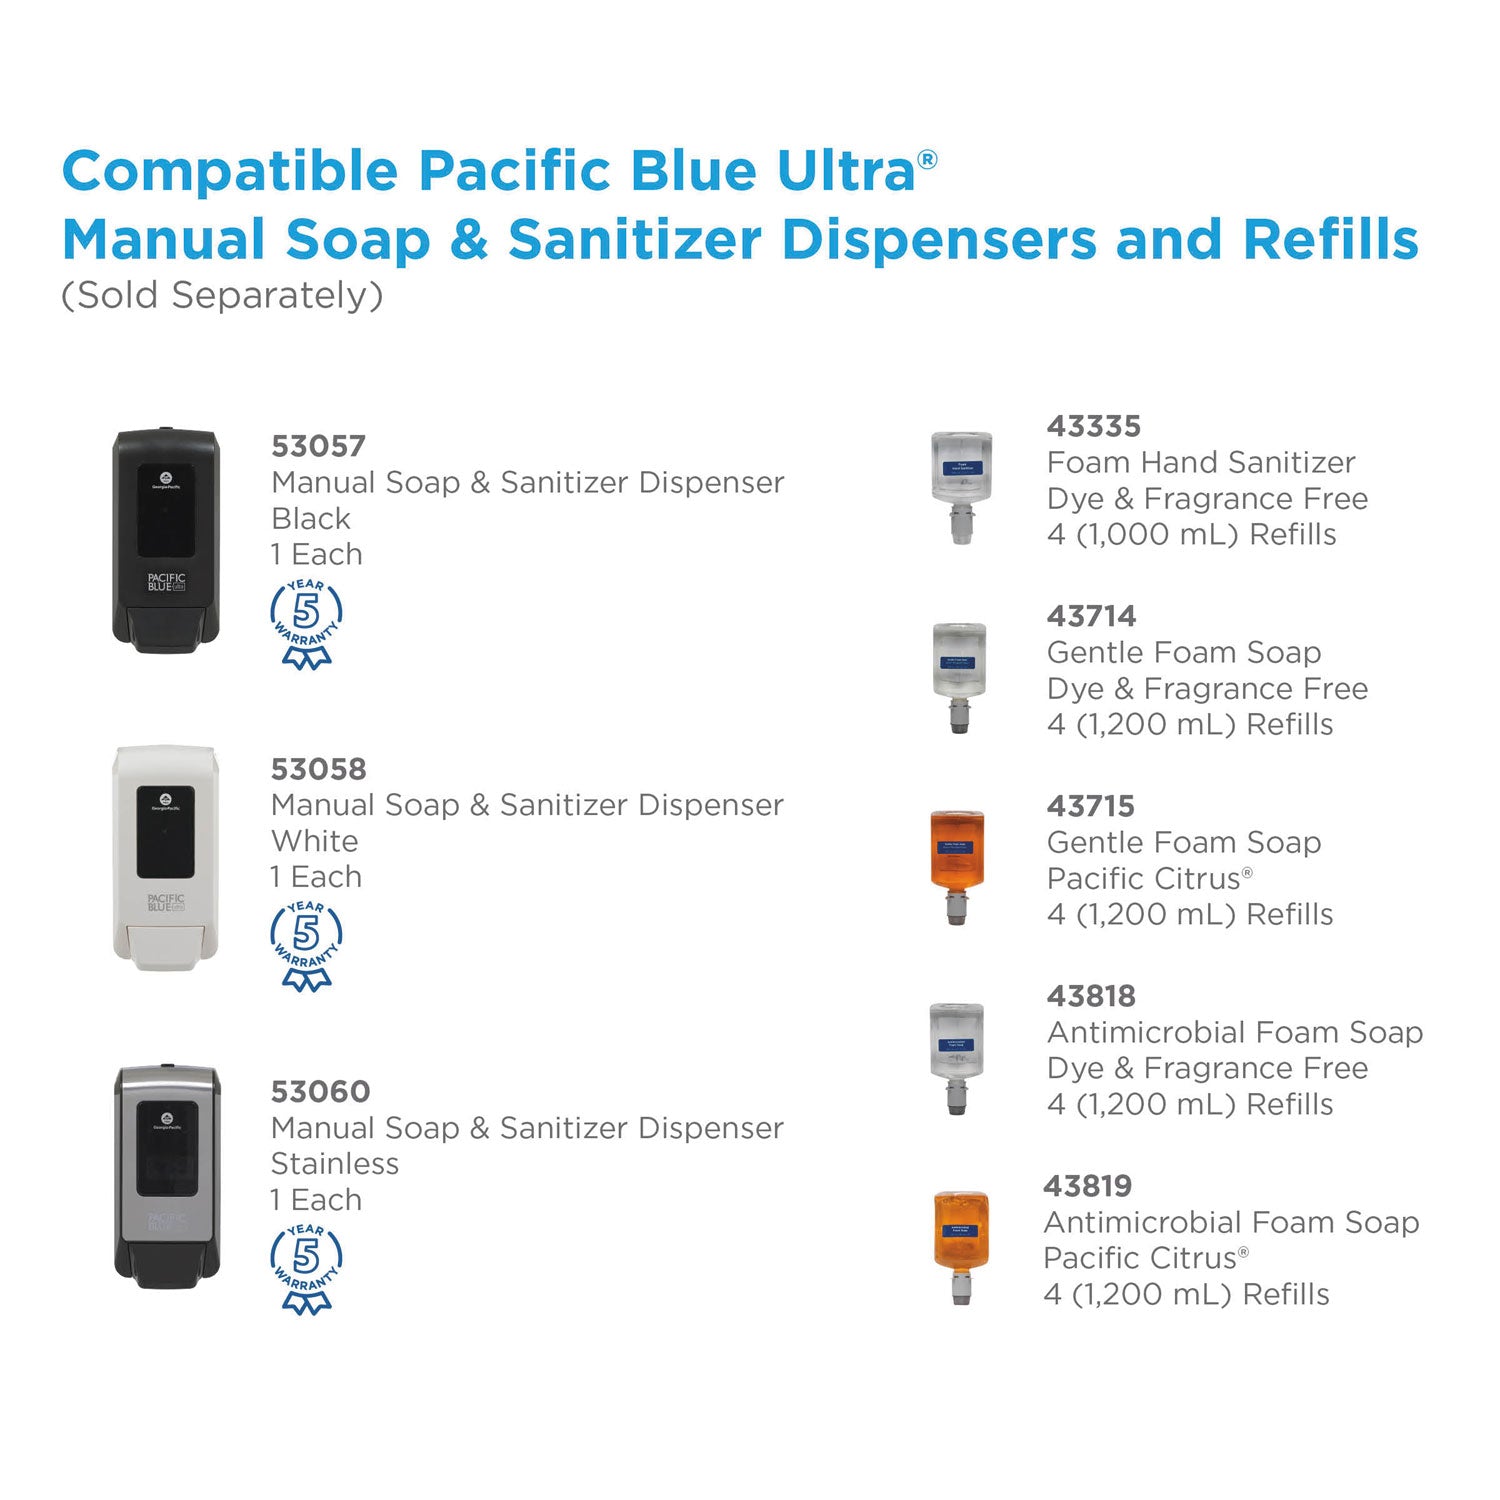 pacific-blue-ultra-foam-hand-sanitizer-refill-for-manual-dispensers-1000-ml-fragrance-free-4-carton_gpc43335 - 6